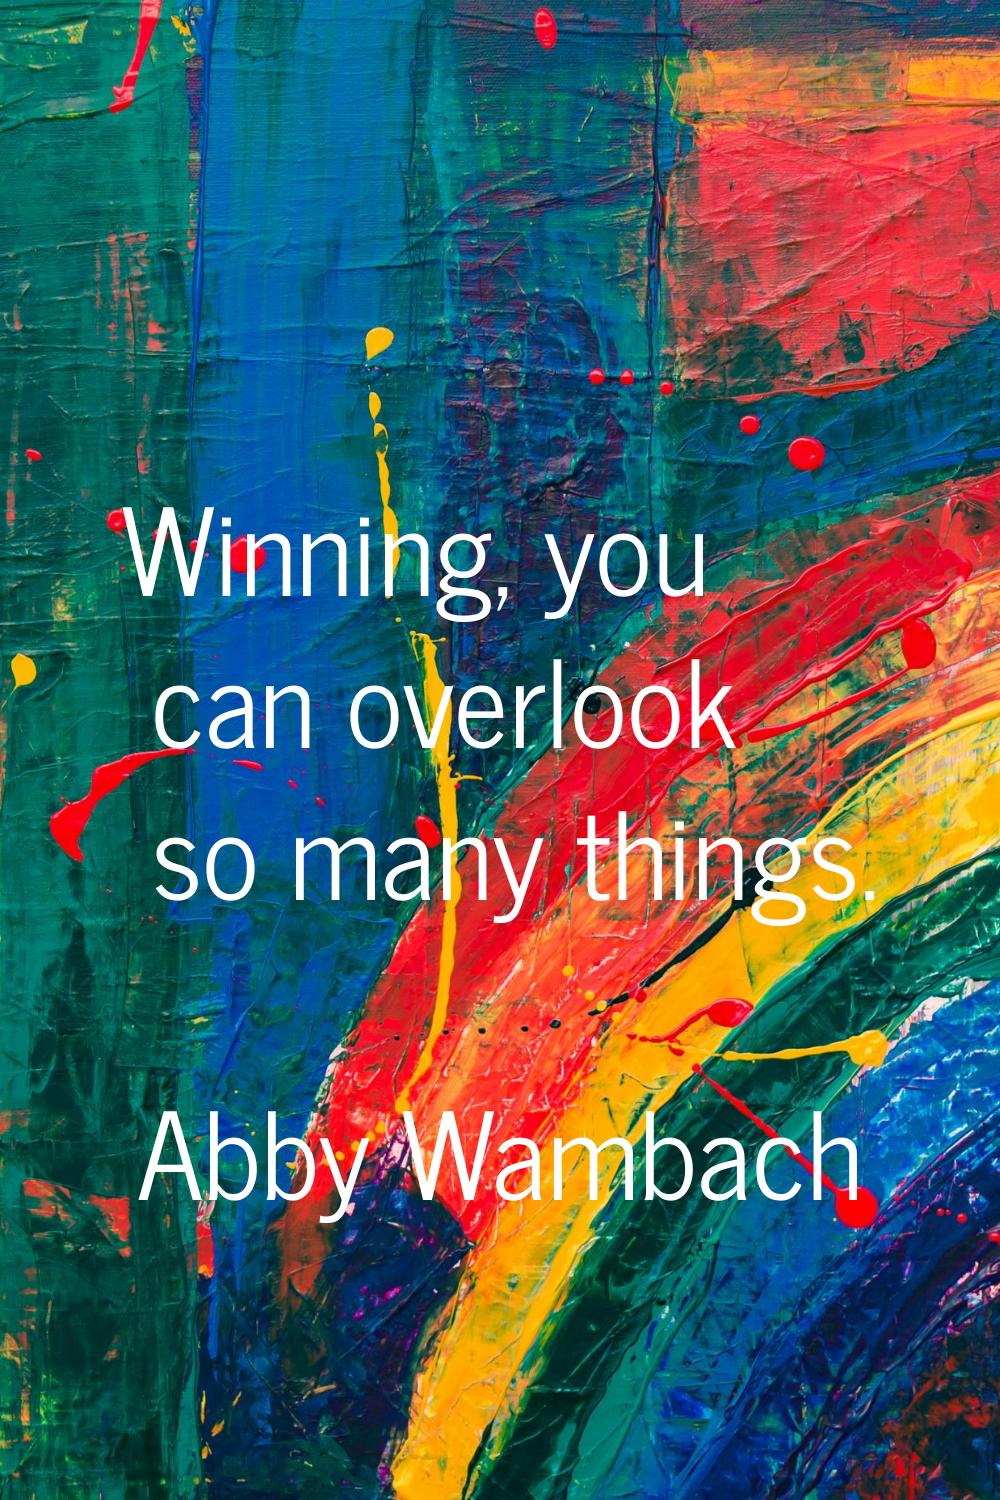 Winning, you can overlook so many things.